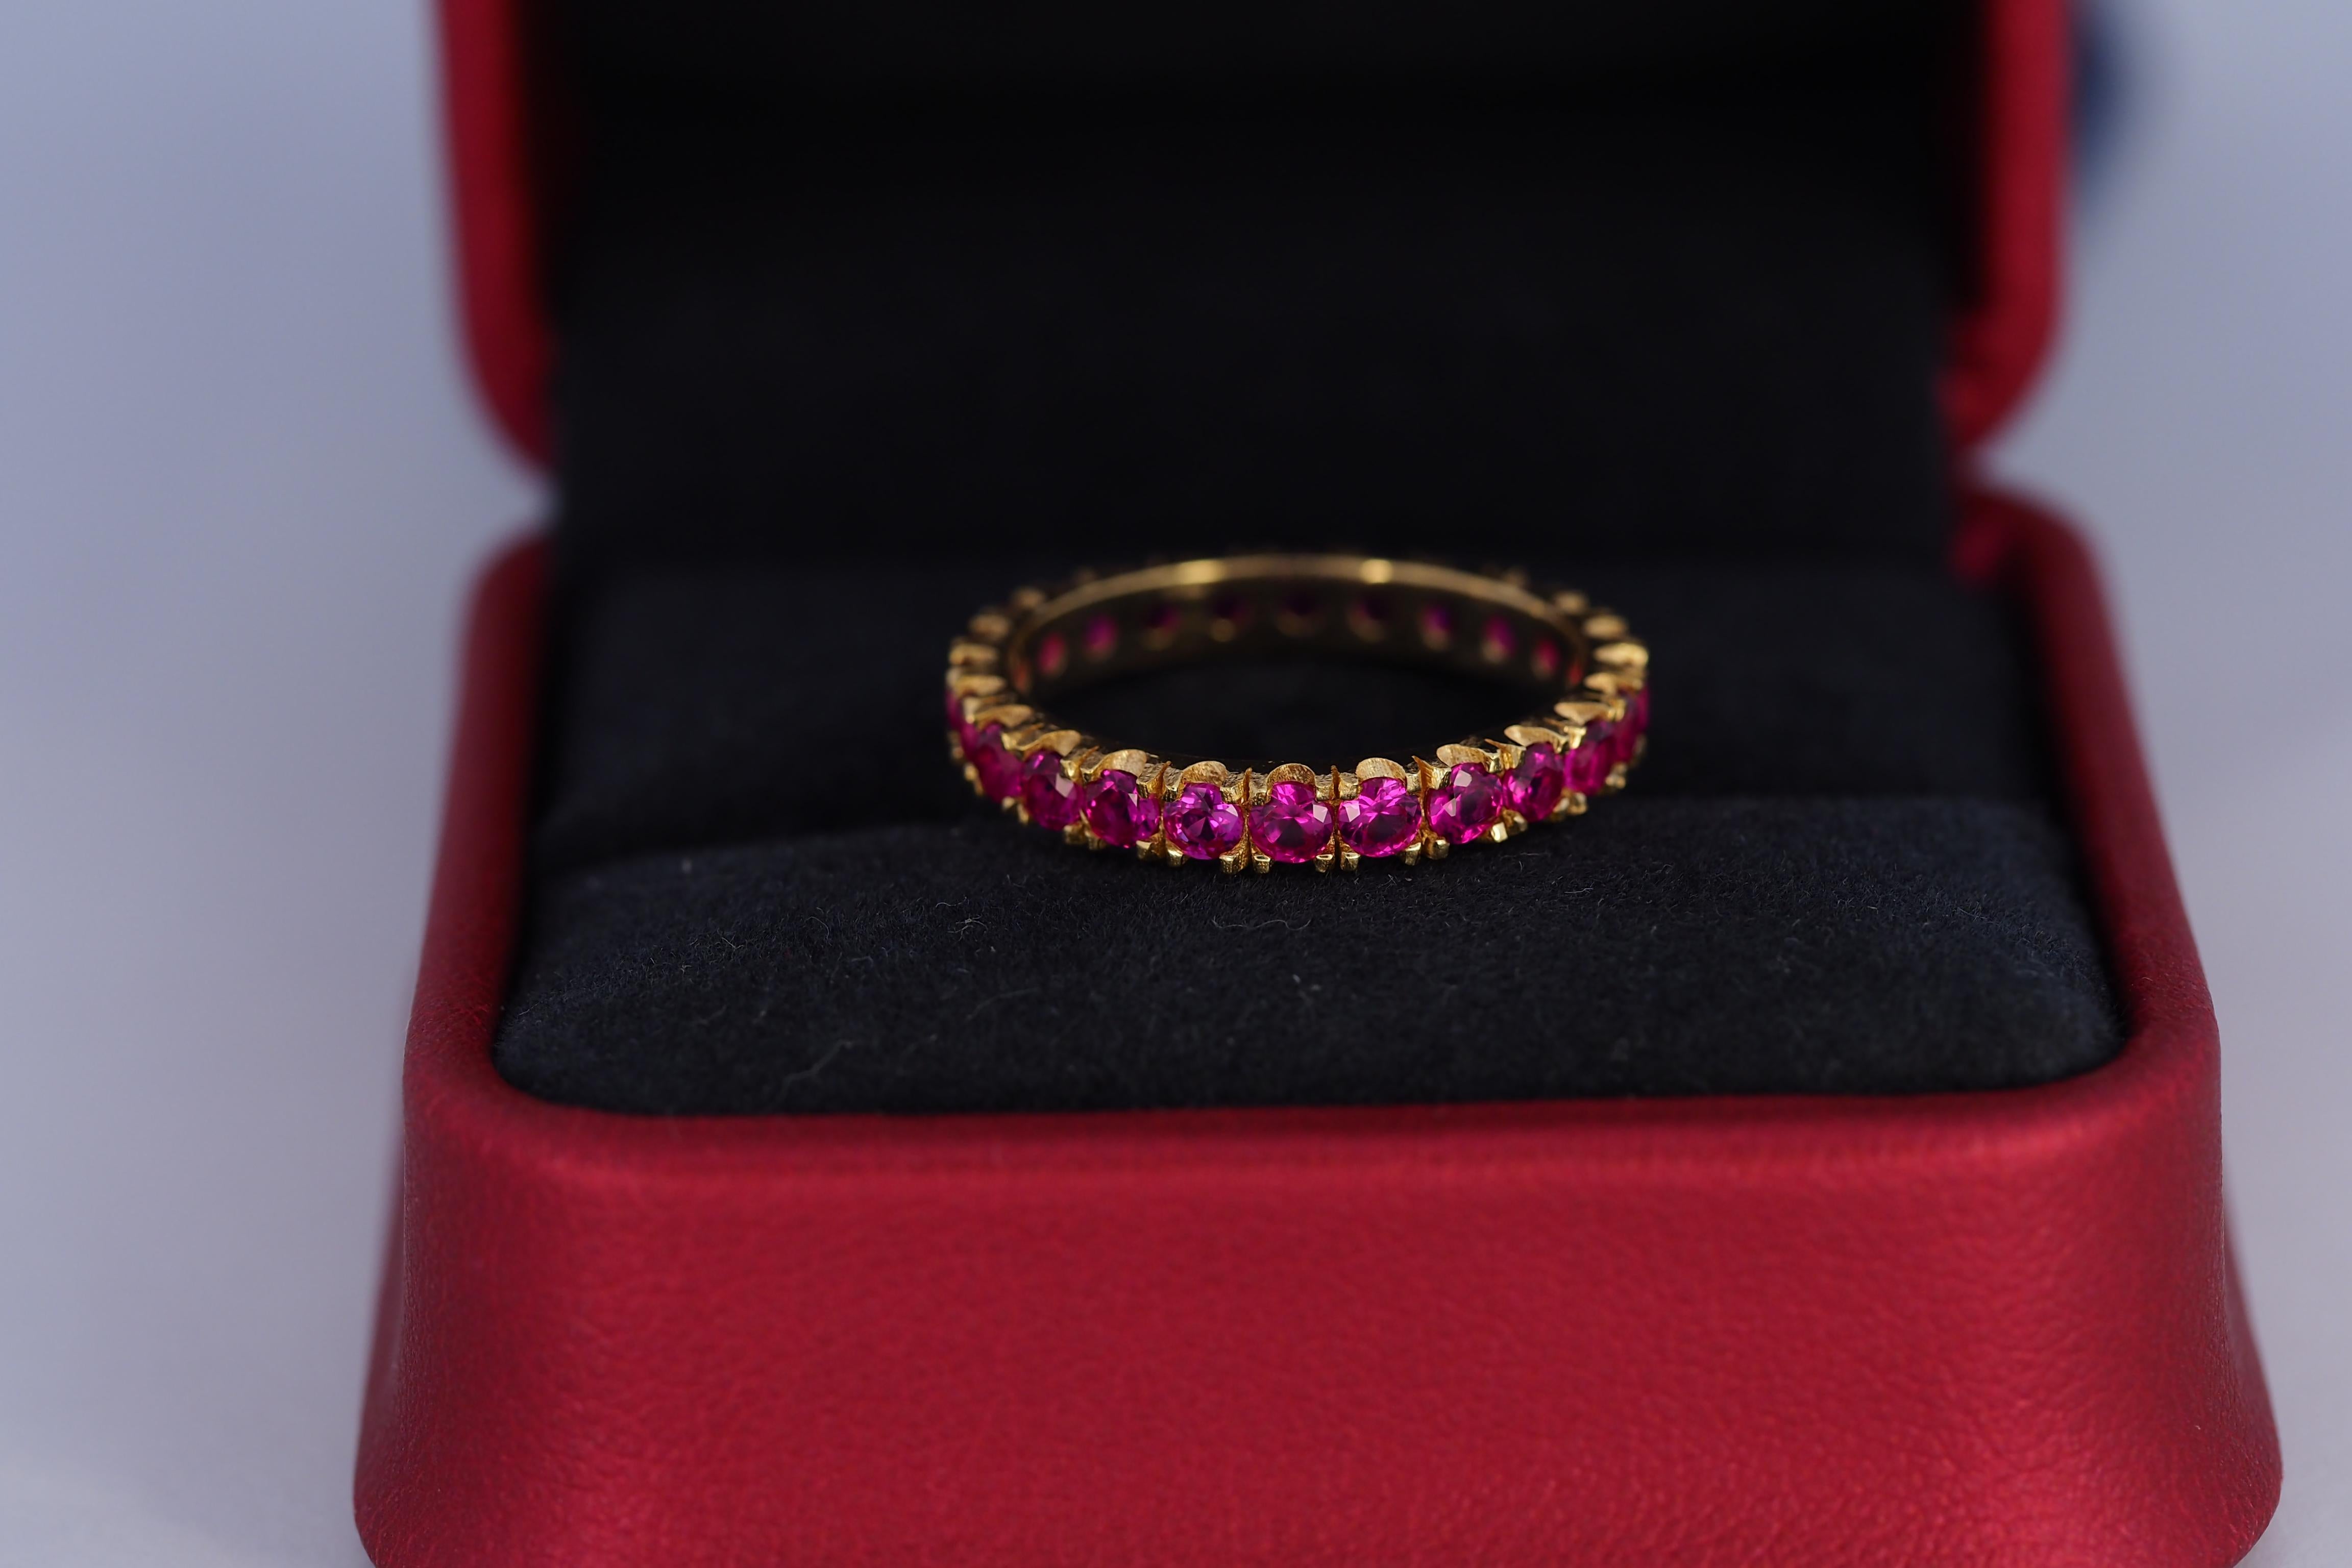 For Sale:  Pinkish red gemstone 14k gold eternity ring band. 3